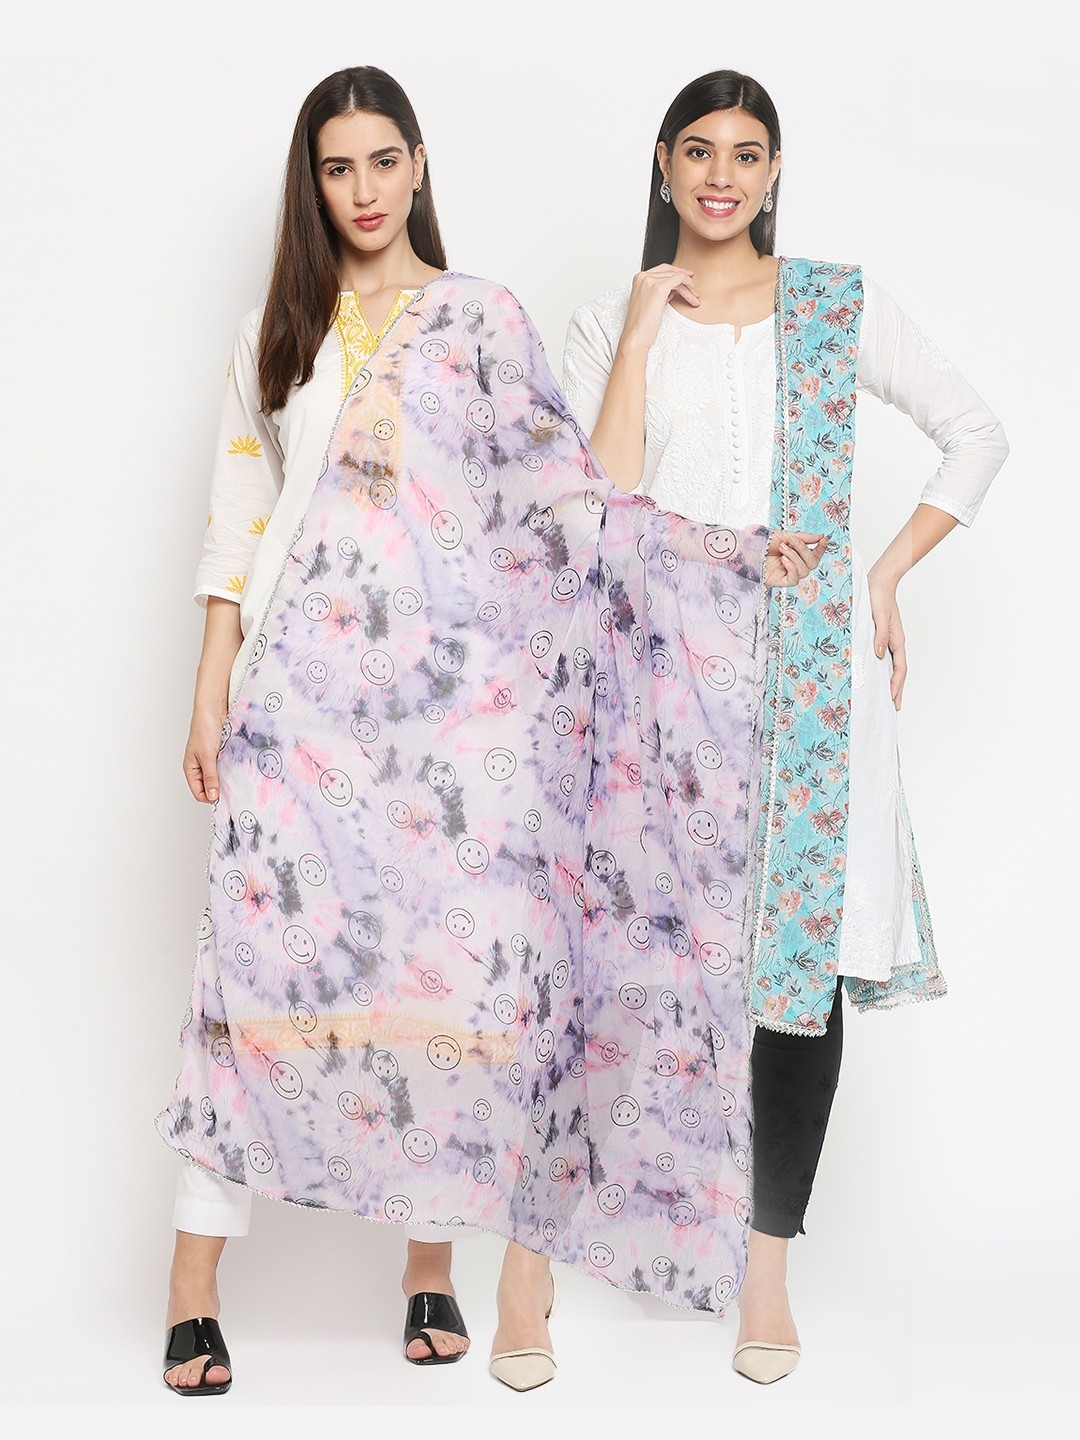 Get Wrapped | Get Wrapped Digital Printed Dupatta with Border Combo for Women - Pack of 2 0